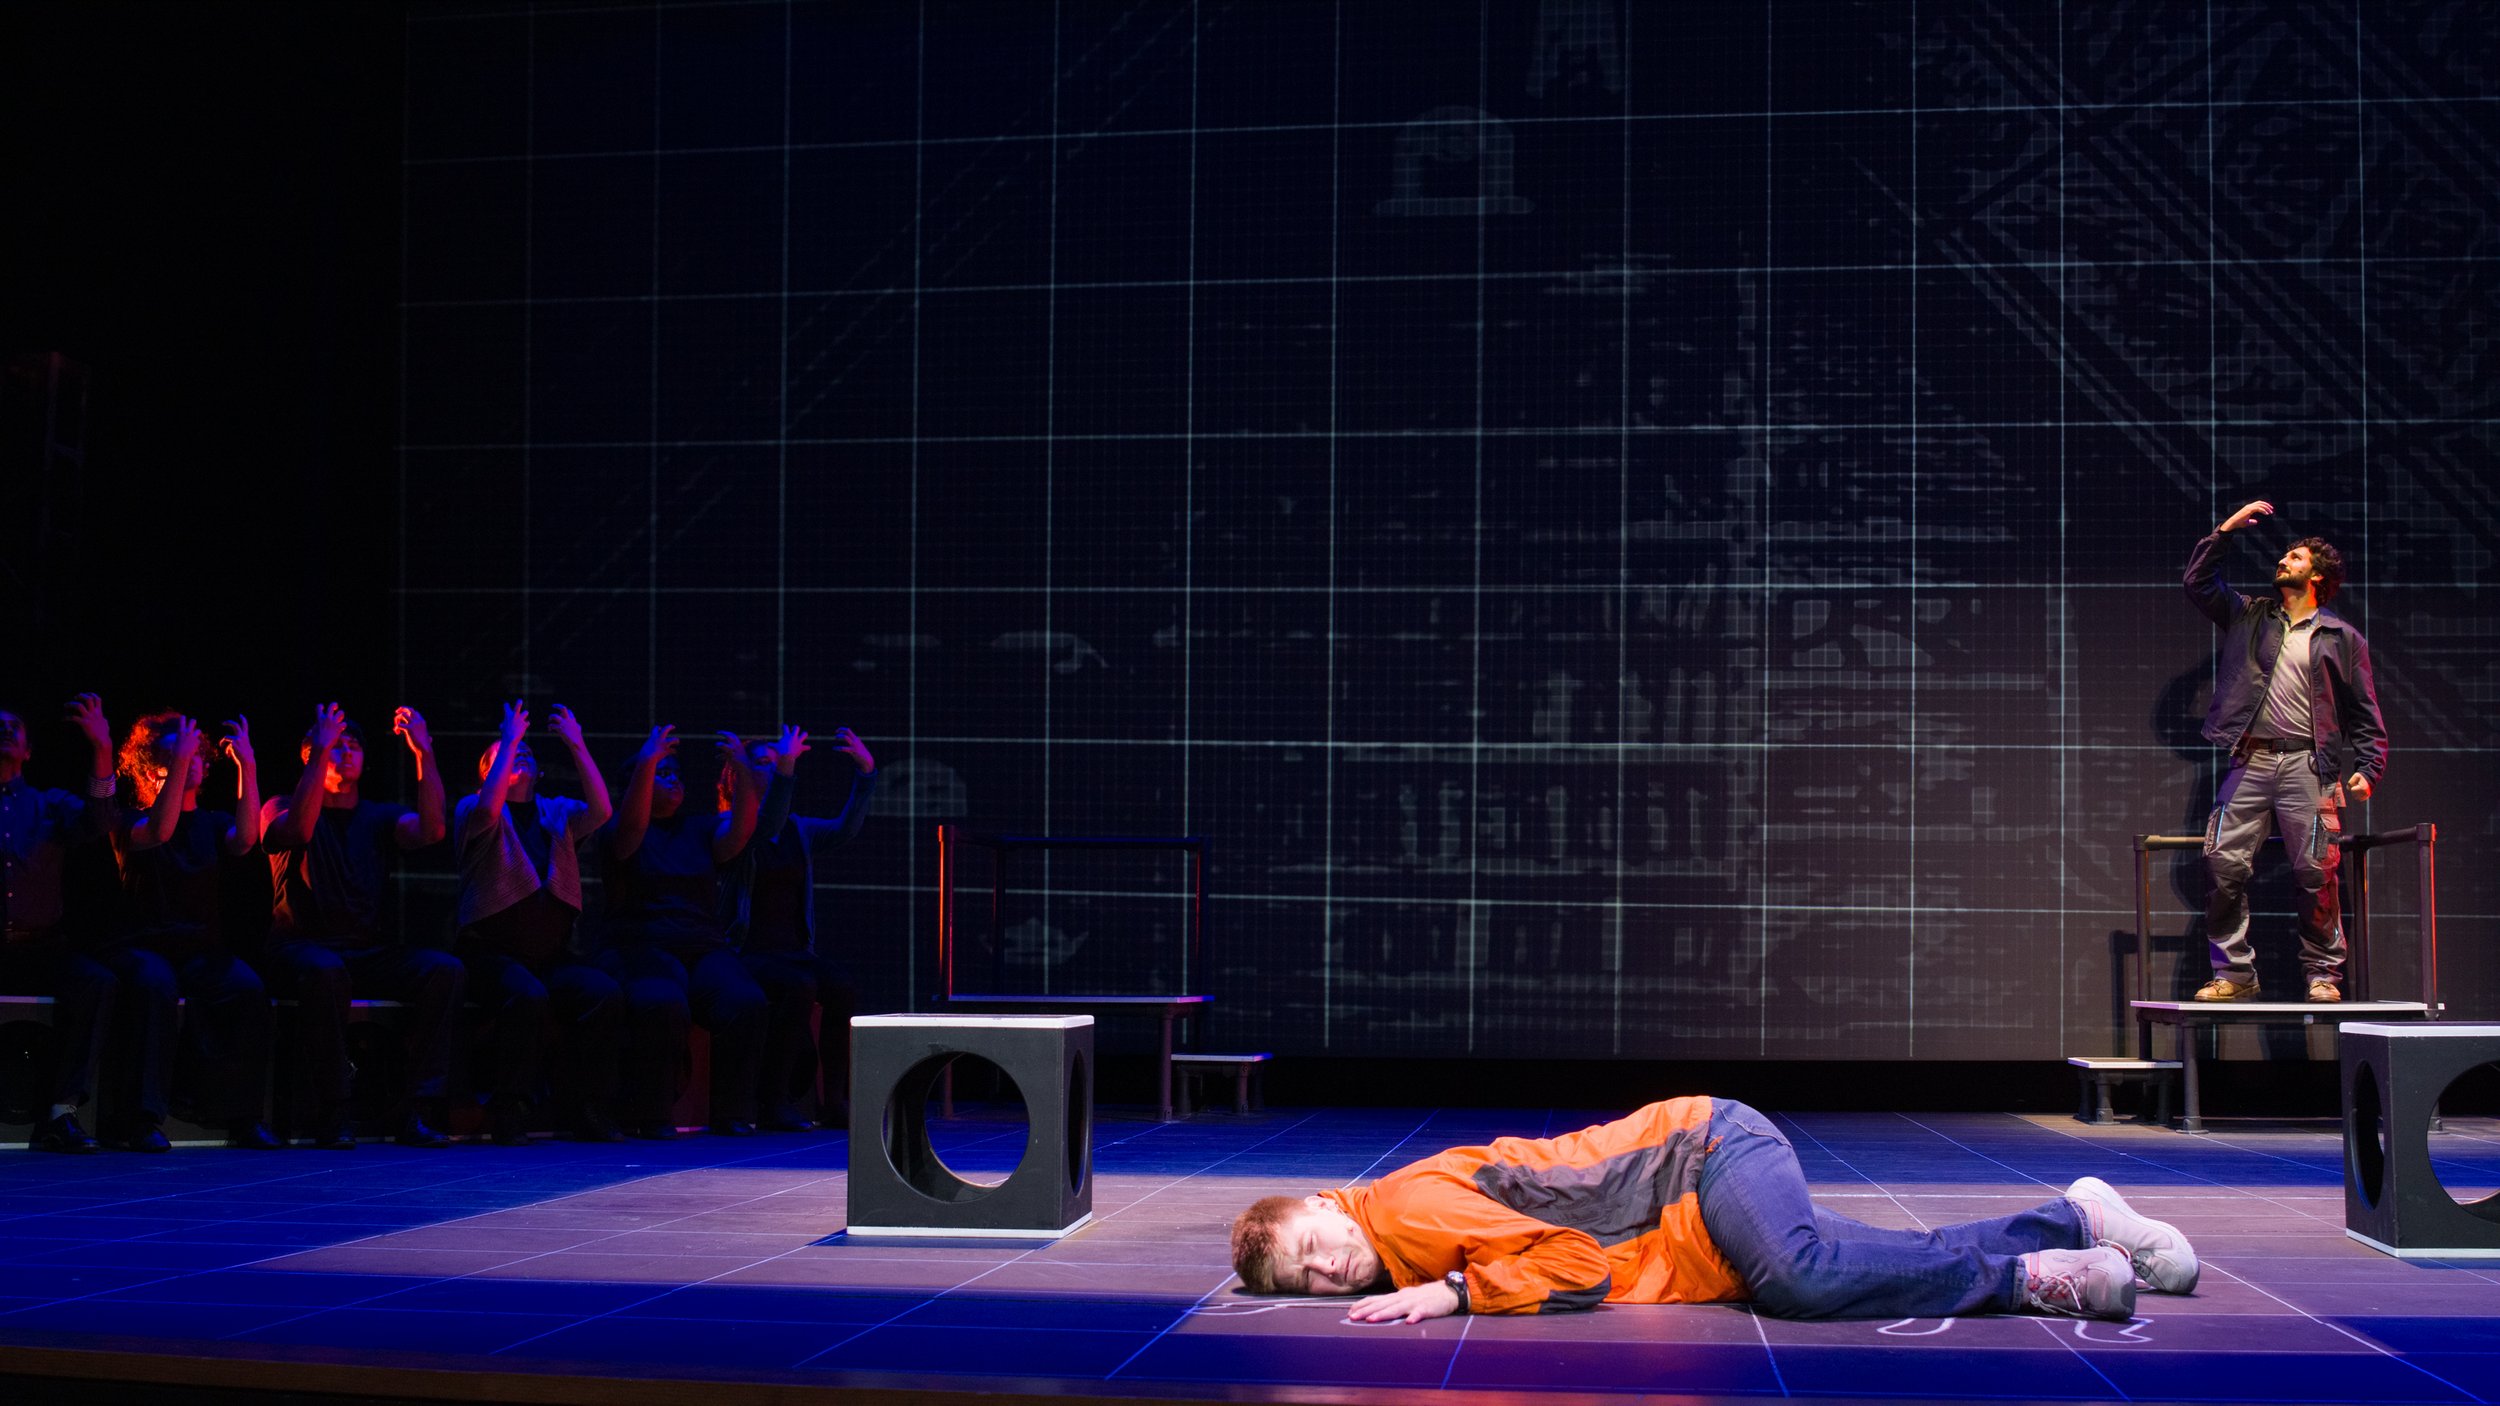  Justin Valine (center) and Tommy Abraham (right) during last dress rehearsal before the first showing of "The Curious Incident of The Dog in The Night-Time" on Thursday, October 7th at Santa Monica College, Santa Monica, Calif. 